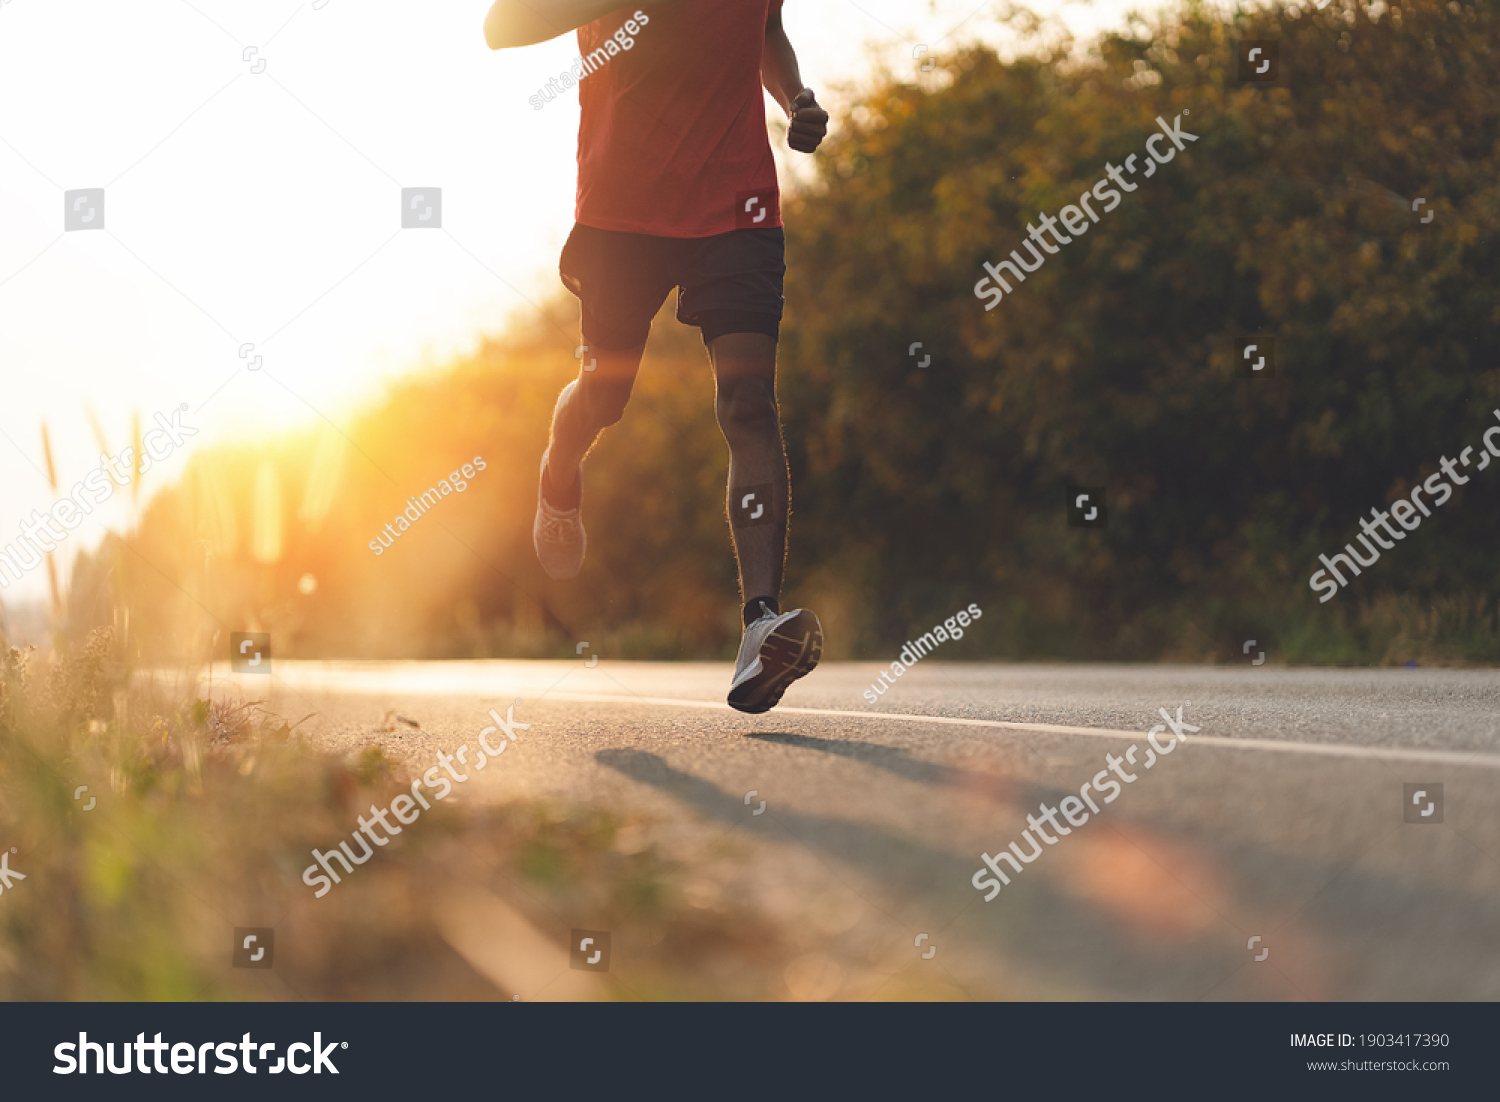 Athlete runner feet running on road, Jogging concept at outdoors. Man running for exercise. #1903417390